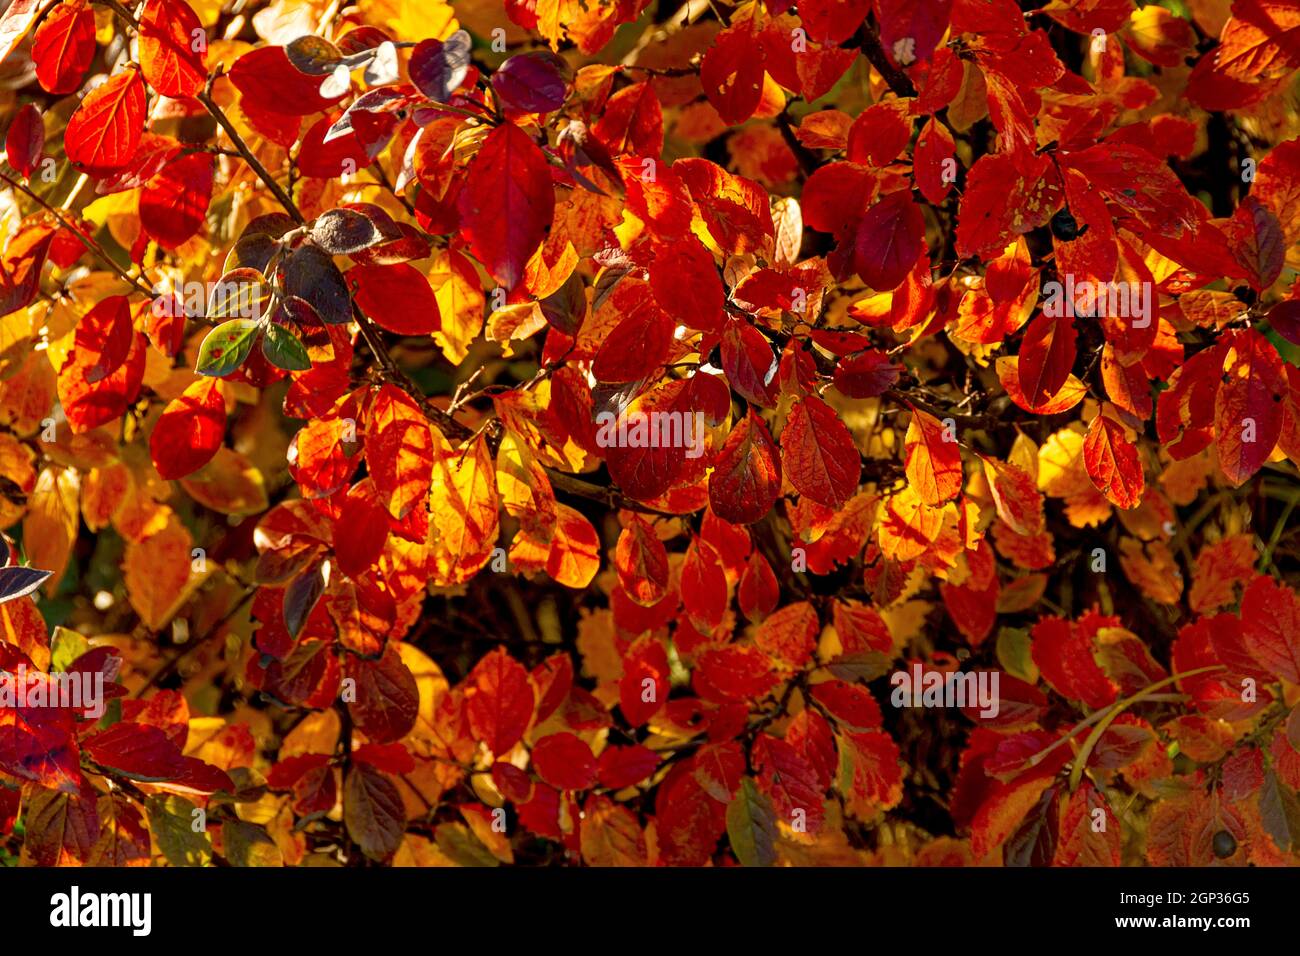 Autumn background with red leaves of brilliant cotoneaster. Stock Photo